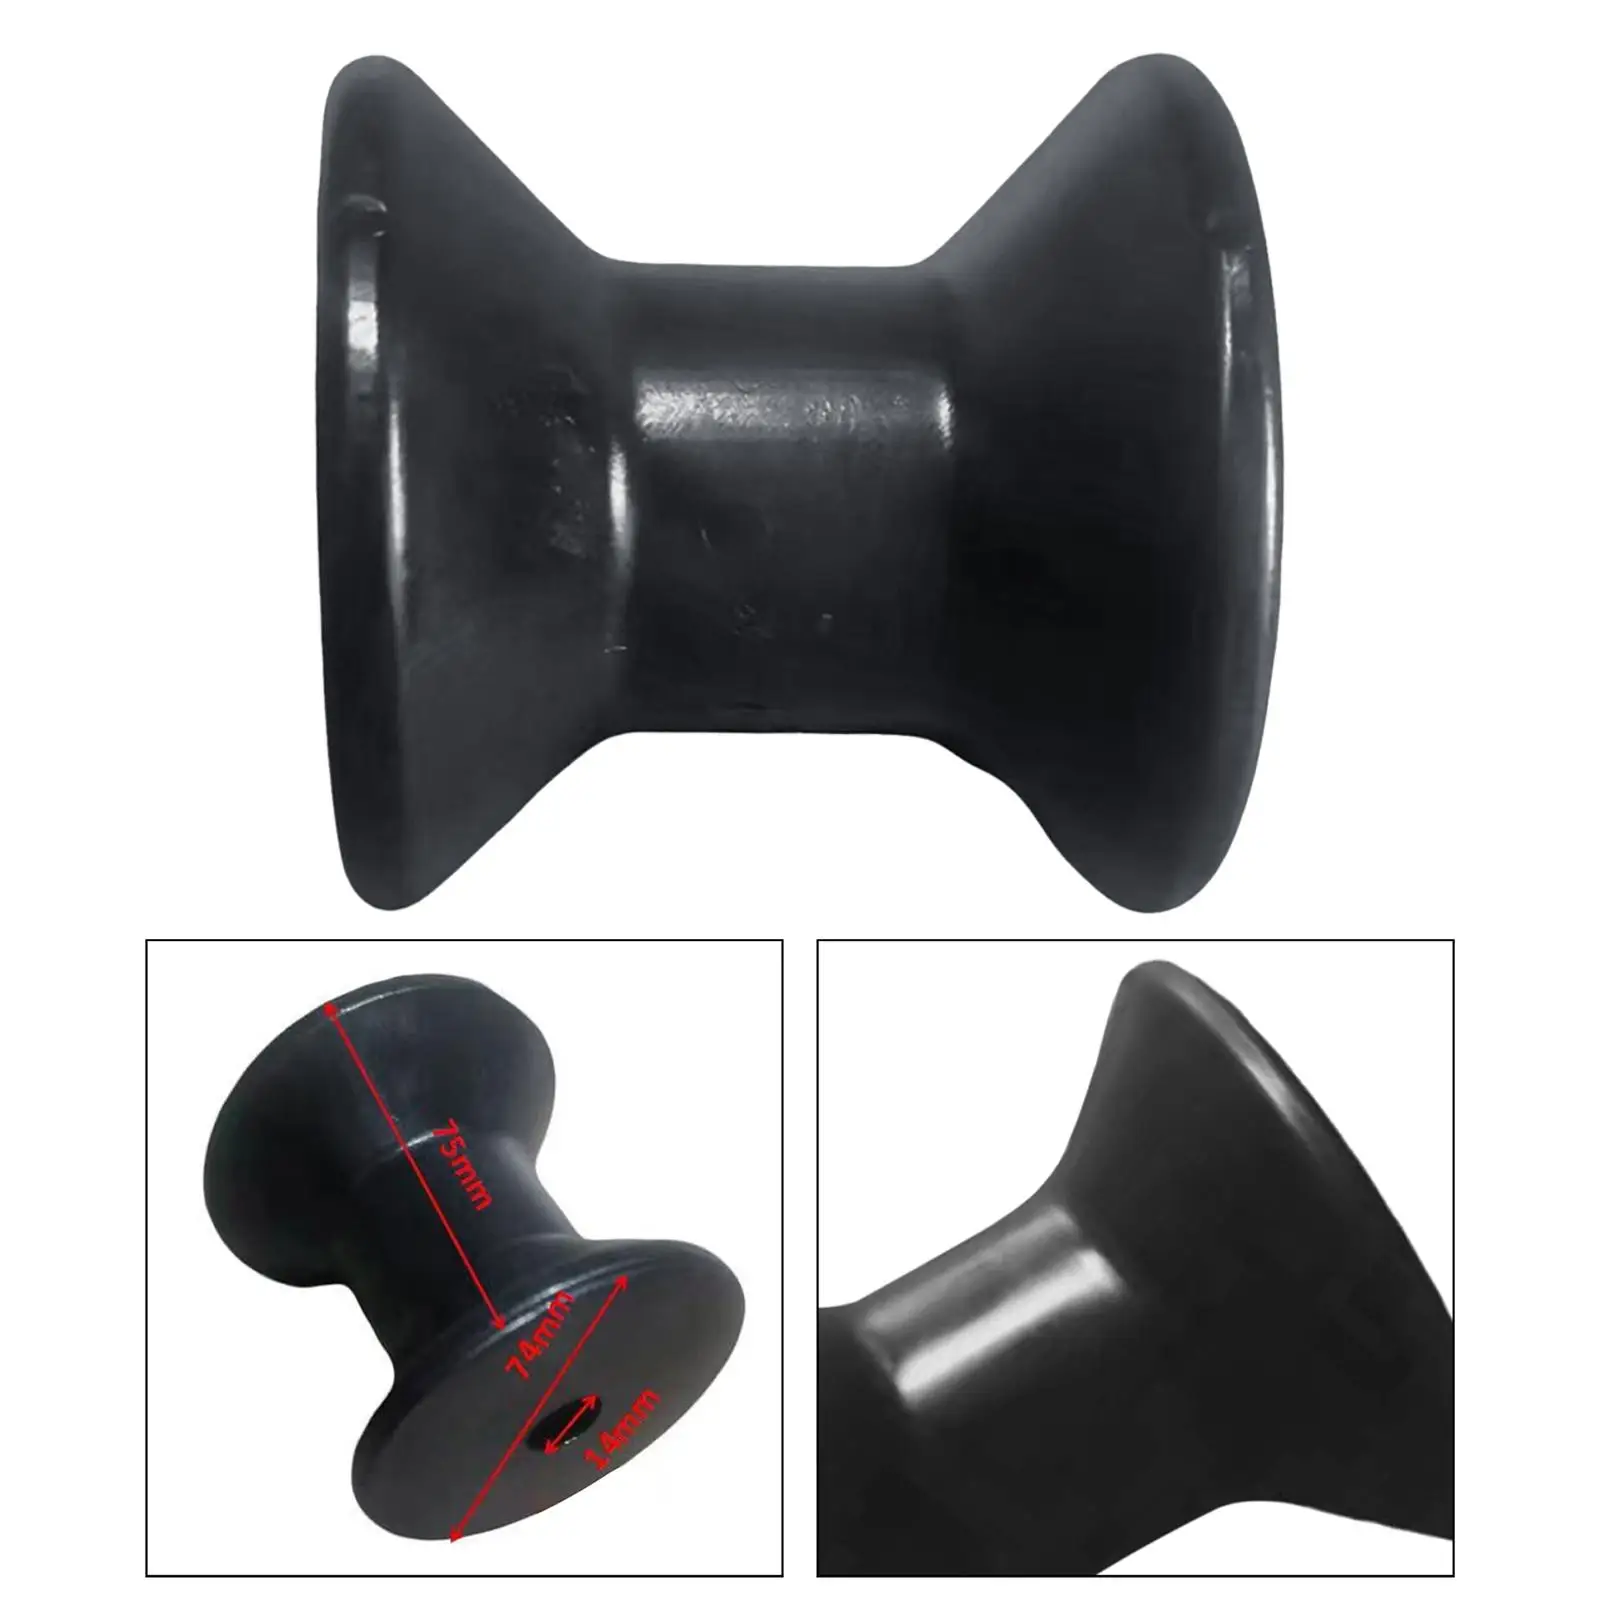 Boat Trailer Roller Accessories Parts Black Drag Reduction Repair for Ports, Warehouses Docks Factories Production Areas